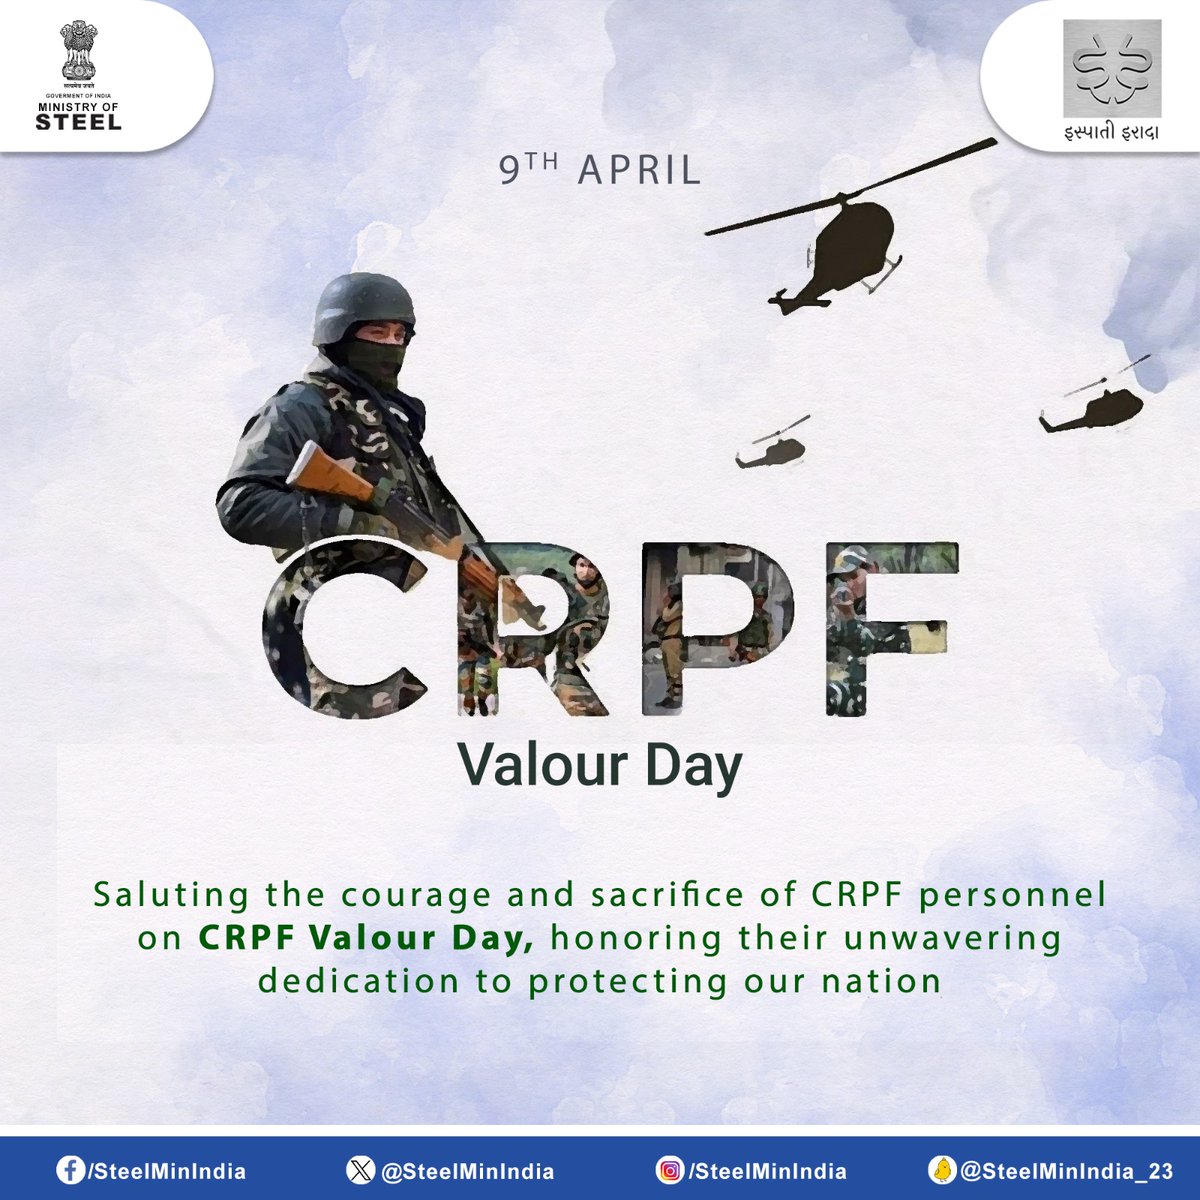 Honoring the brave hearts of #CRPF on #ValourDay, their courage inspires us all. Salute to the guardians of our nation's safety. #CRPFValourDay #SaluteToCourage